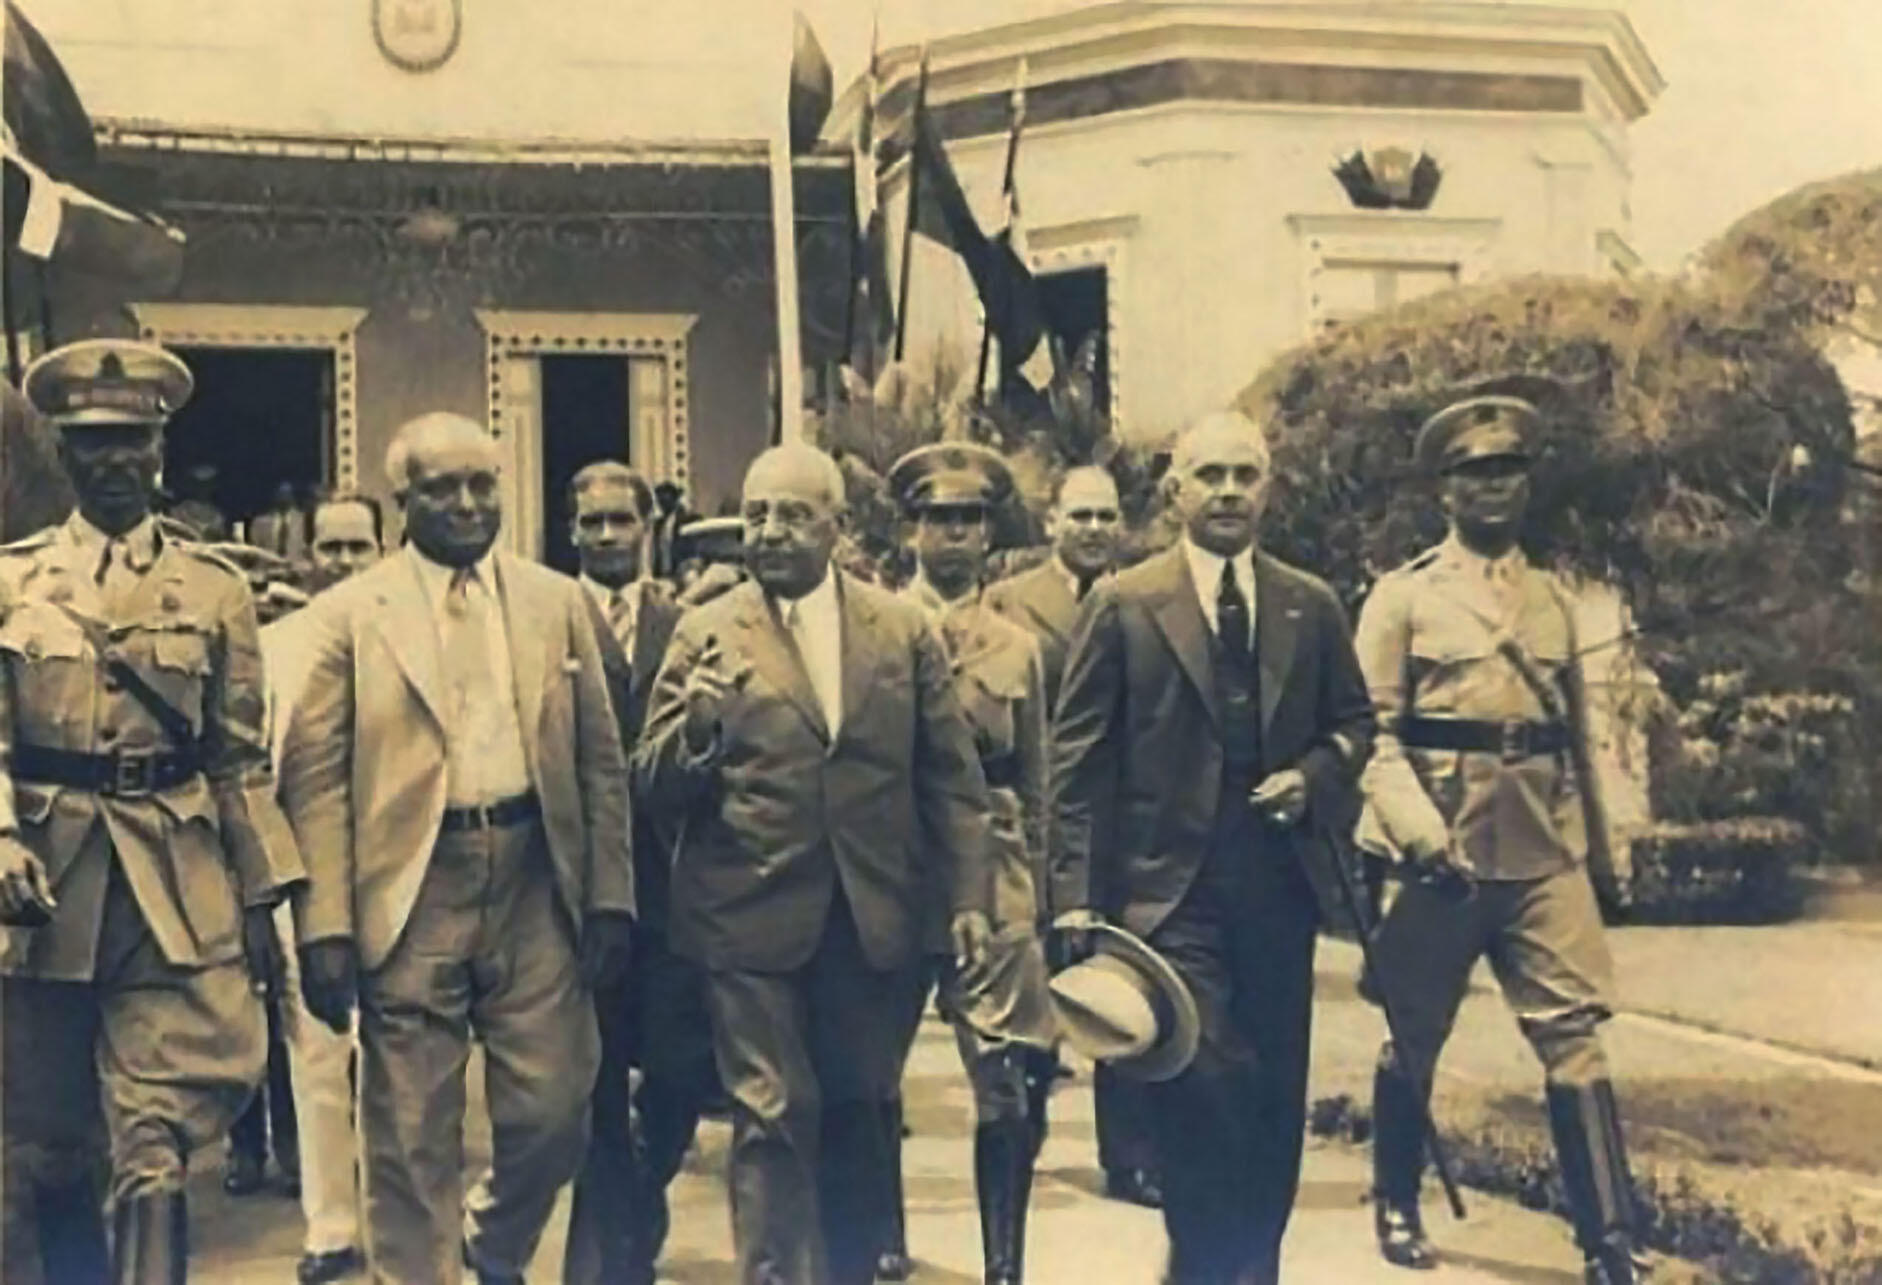 Black and white photo of the meeting between Haitian president Sténio Vincent and Rafael Trujillo on the border between Haiti and the Dominican Republic, 1933. (Photo from Wikimedia.)